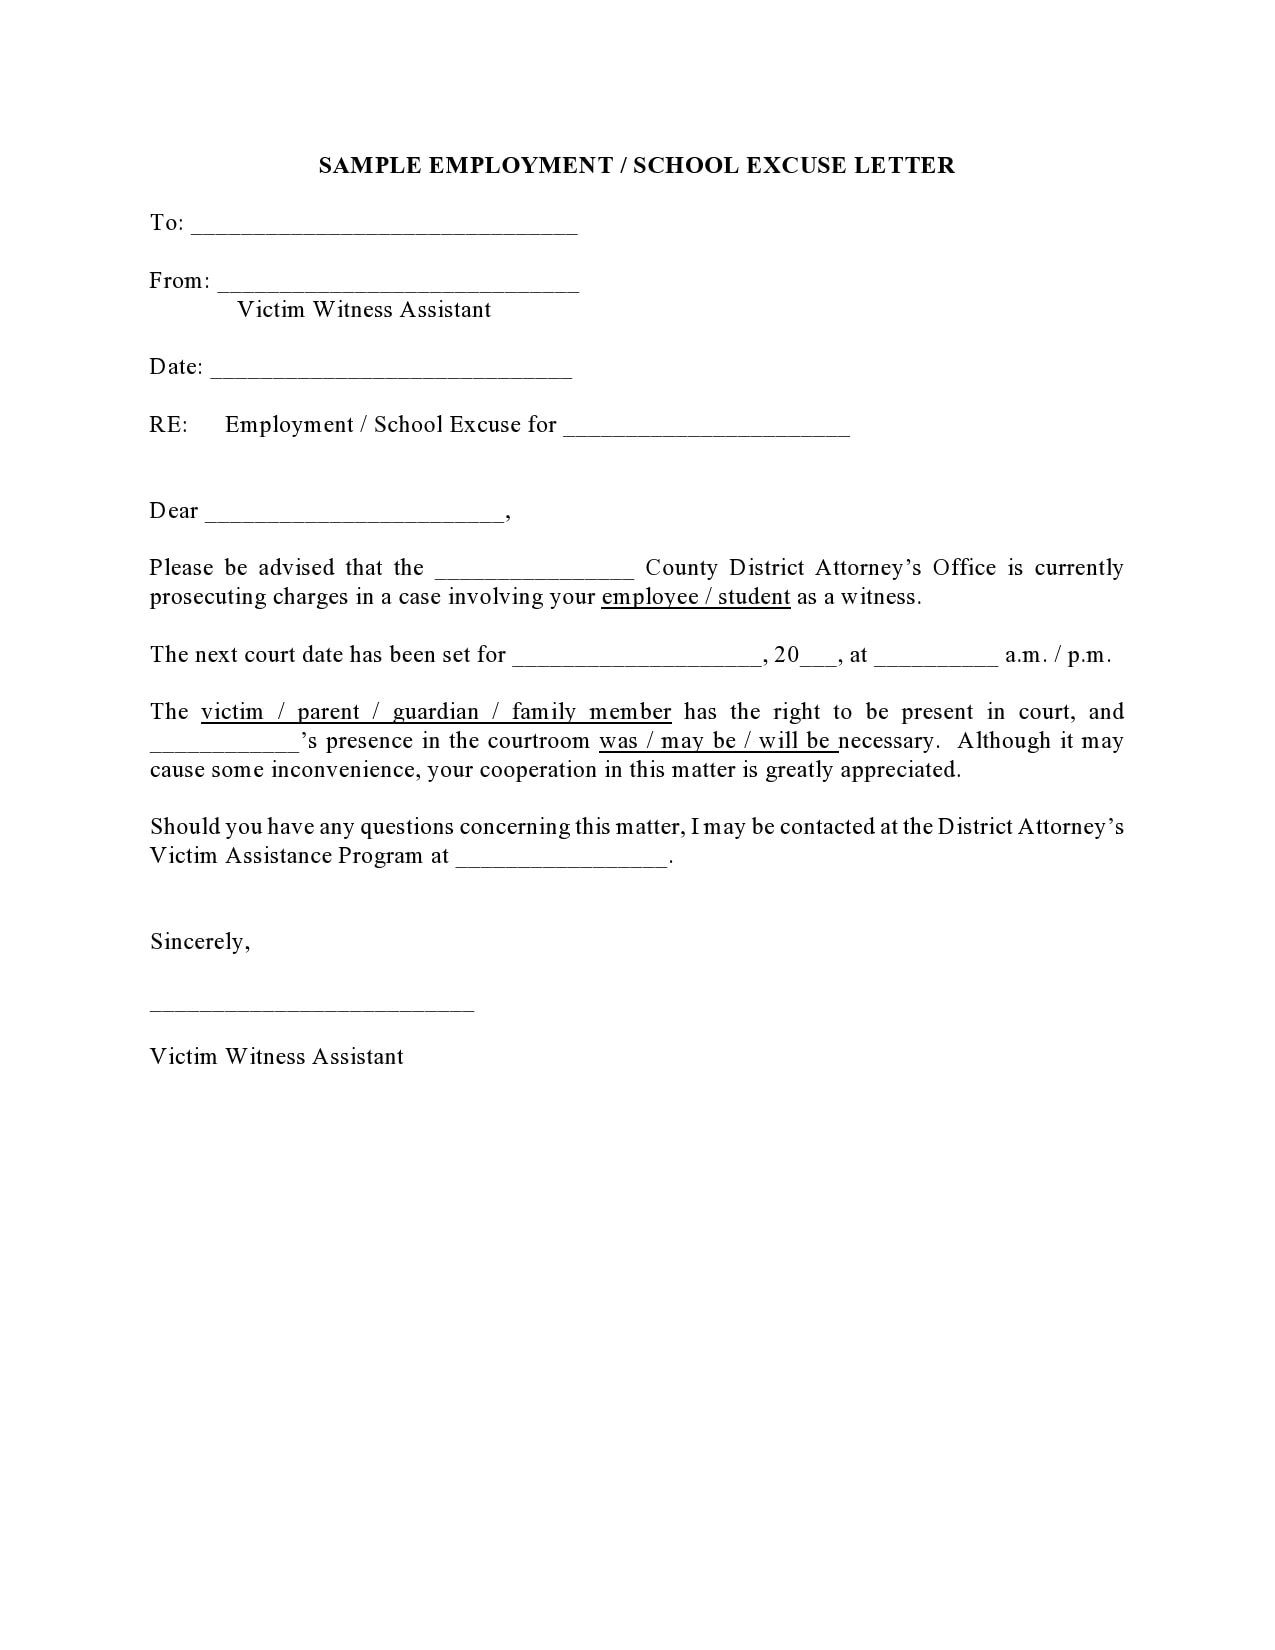 23 Free Excuse Letters (Absent Notes For School) - TemplateArchive Pertaining To Dentist Note For School Template